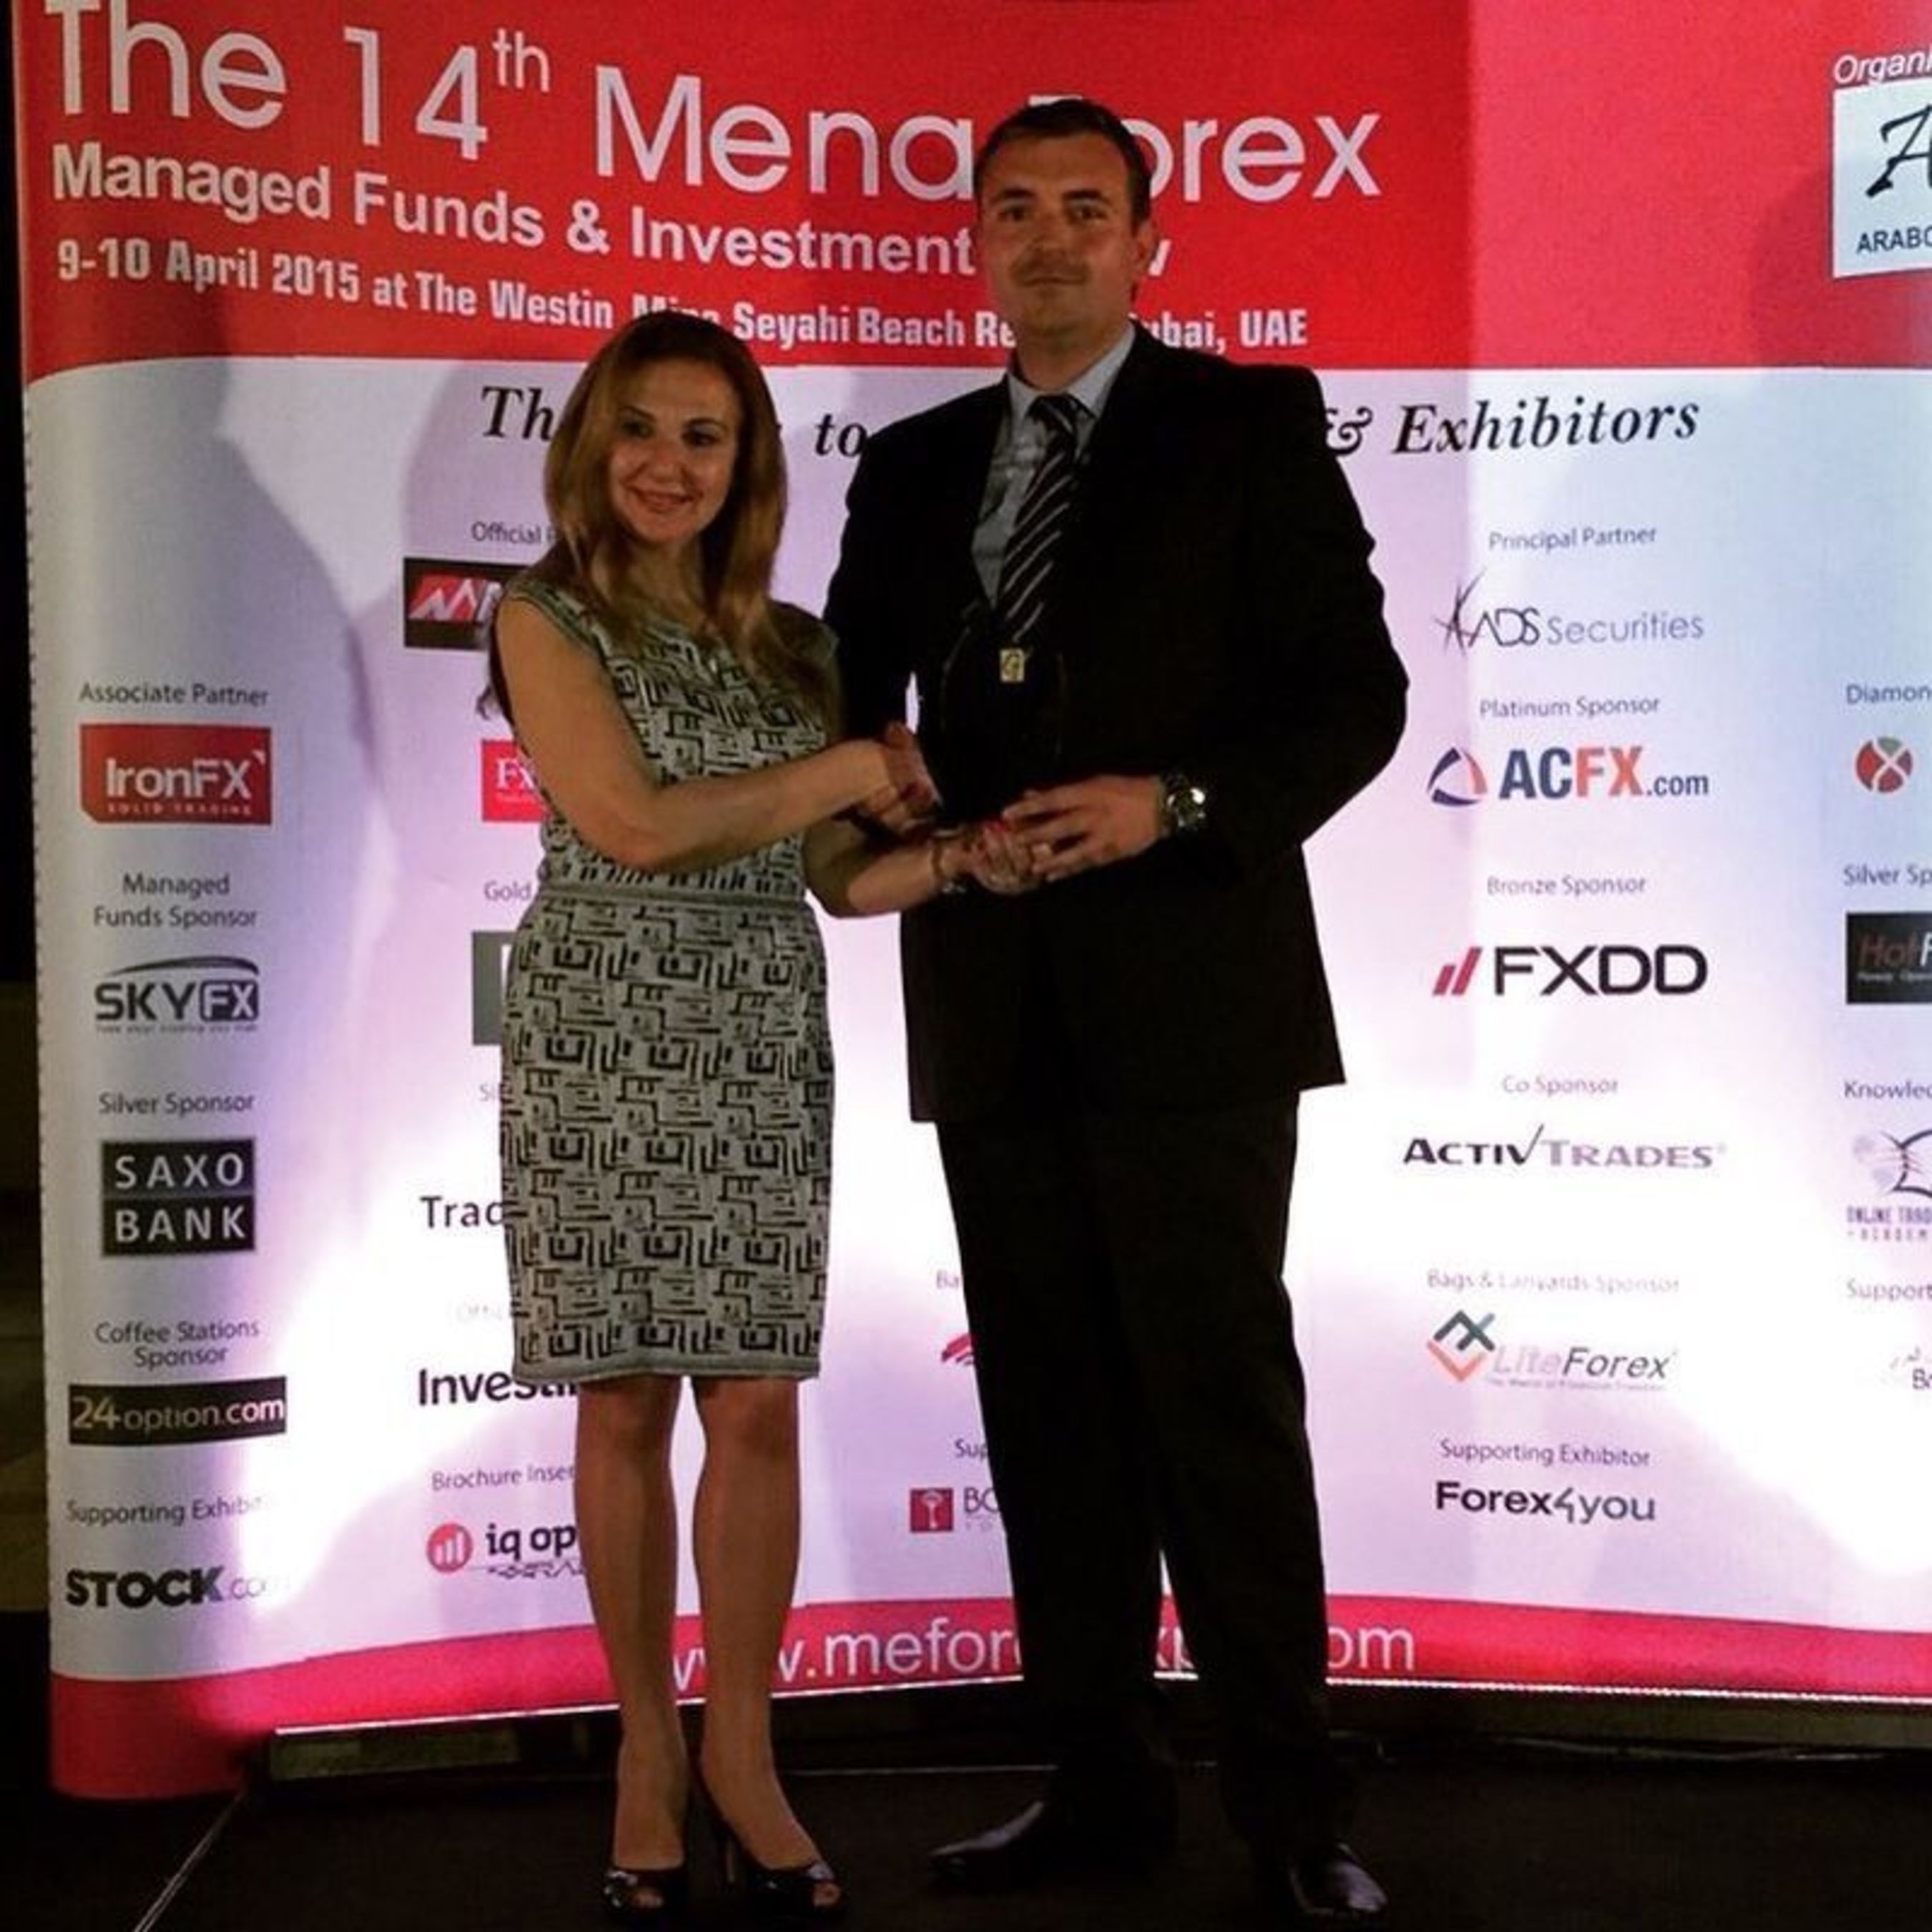 ACFX has been awarded the "Broker of the Year" and "Best Affiliate Program" awards at the closing ceremony of Arabcom's 14th MENA Forex Managed Funds and Investment Expo held in Dubai. Mr. Petar Gazivoda General manager of ACFX received the awards from Mrs. Katia Tayar president of Arabcom Group. (PRNewsFoto/ACFX)